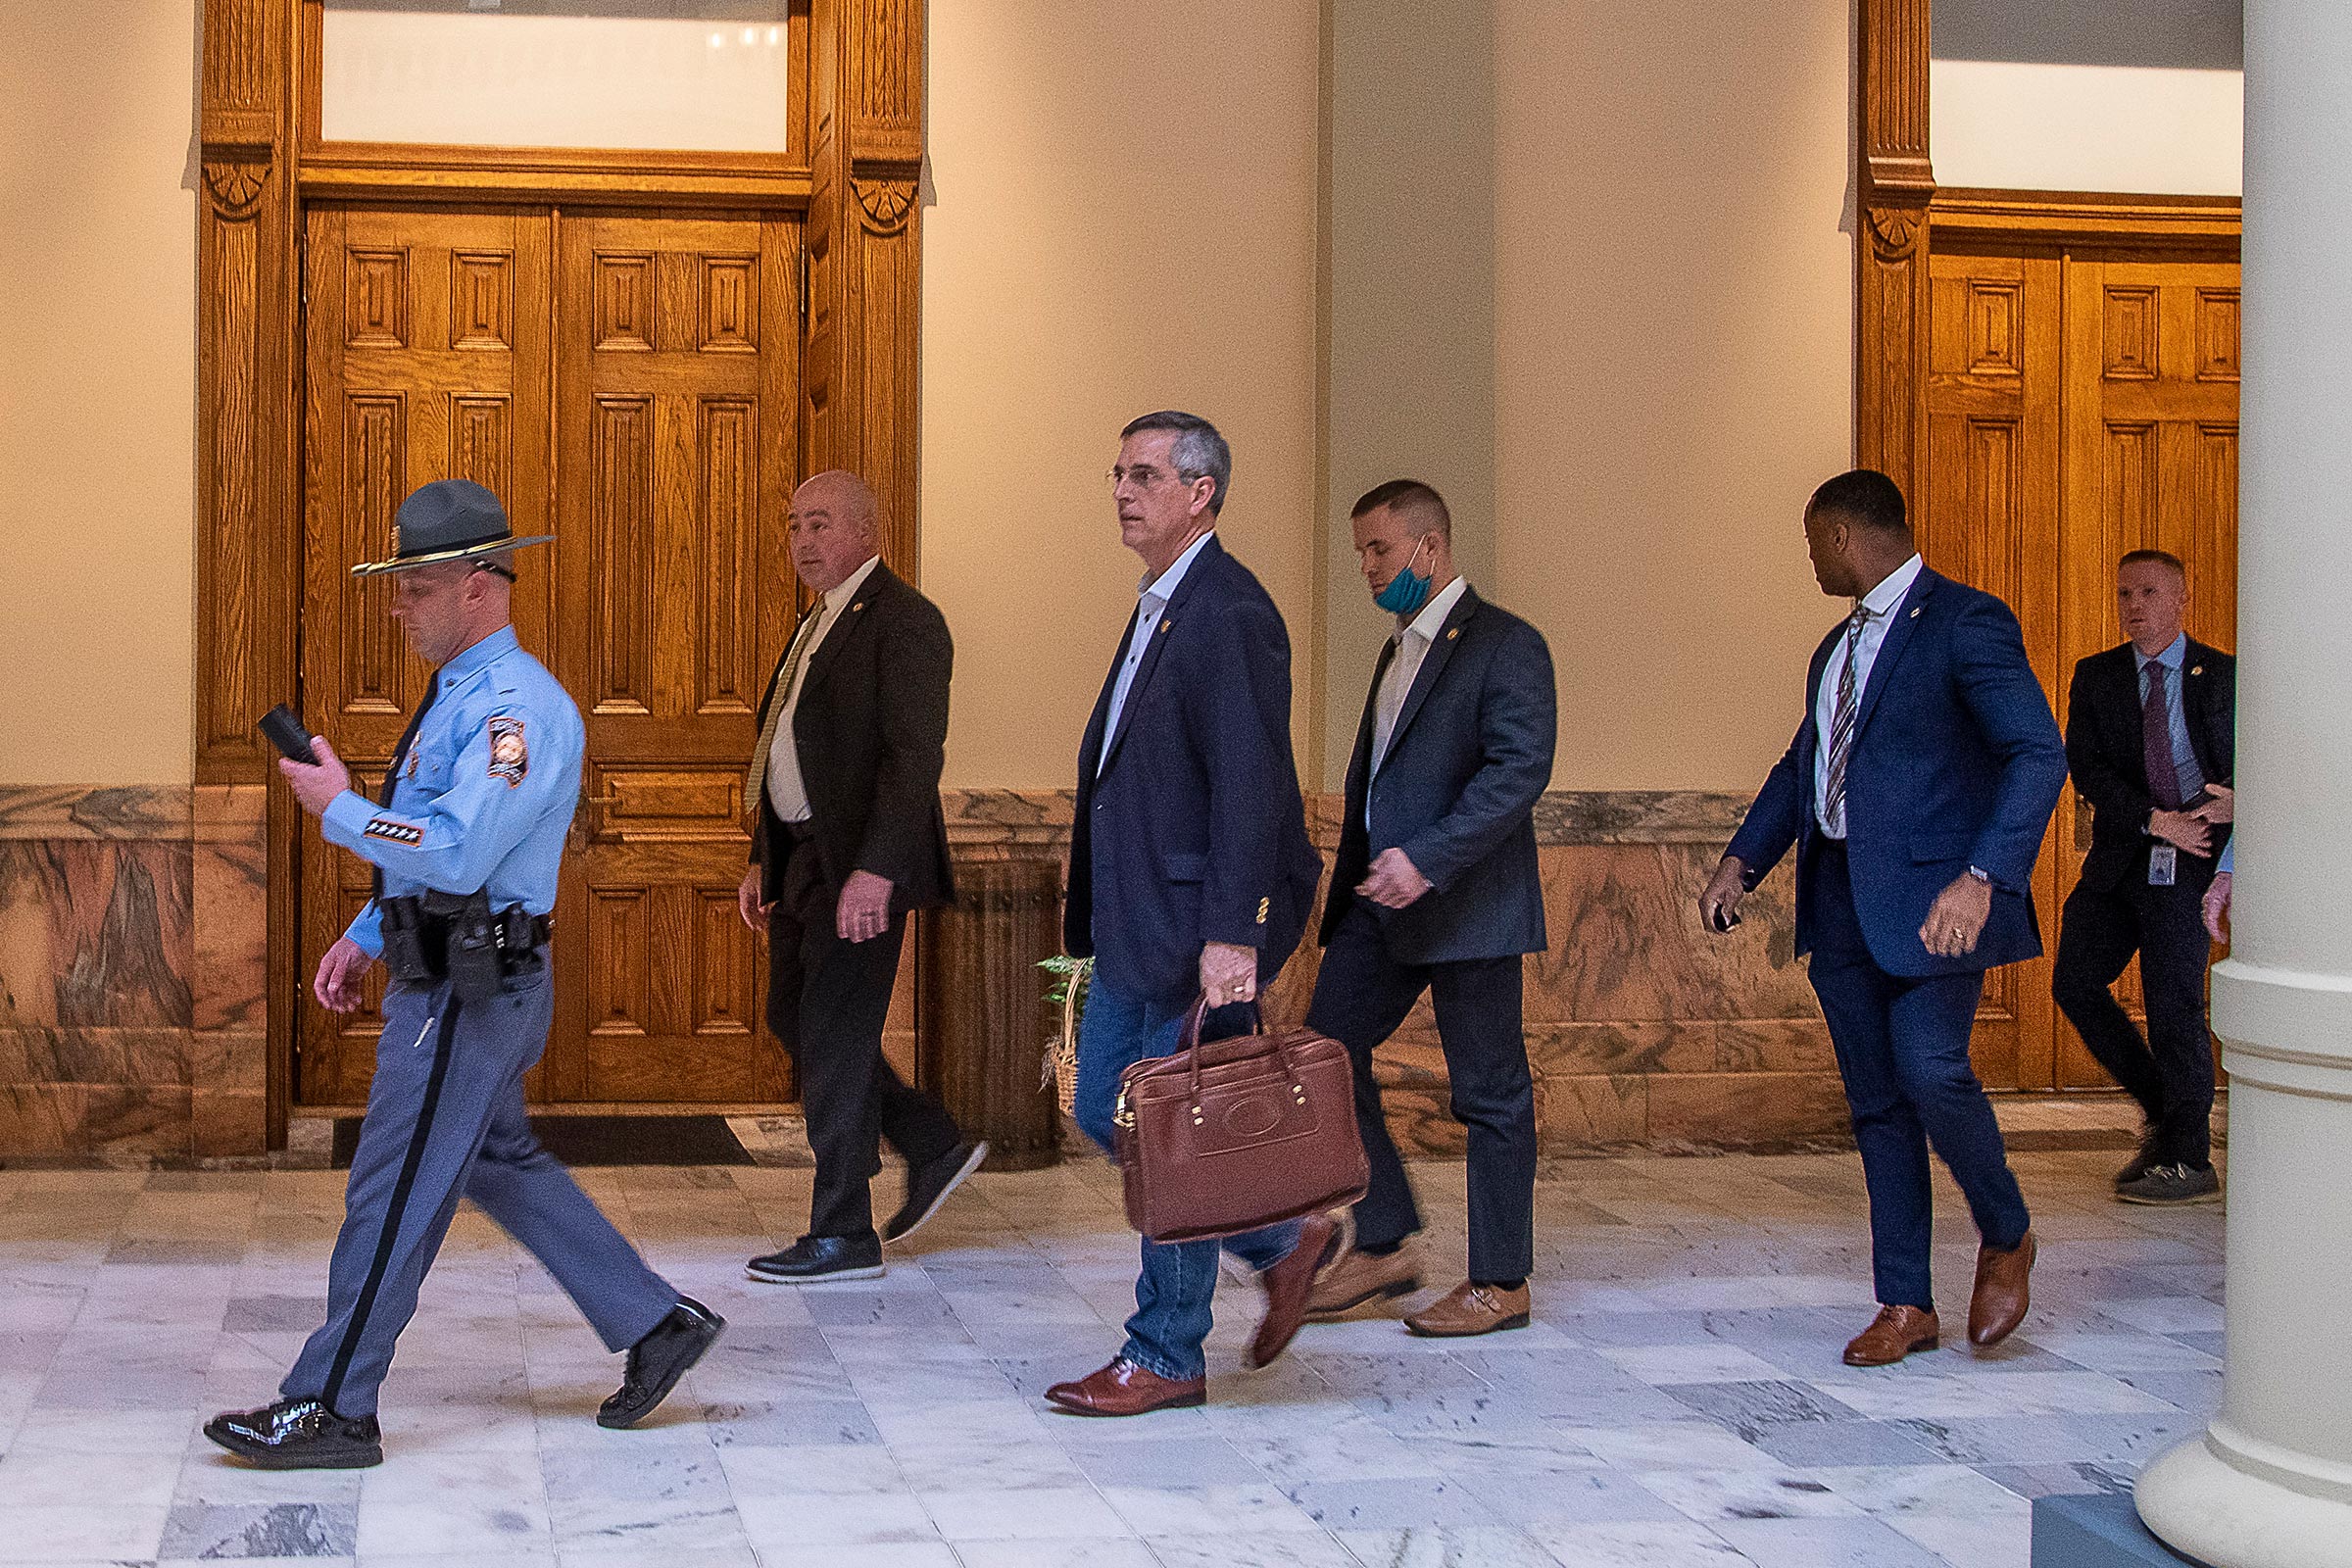 Lead by a Georgia State Trooper, Georgia Secretary of State Brad Raffensperger, center, exits the Georgia State Capitol building after hearing reports of threats, in Atlanta, Jan. 6, 2021. (Alyssa Pointer—Atlanta Journal-Constitution/AP)